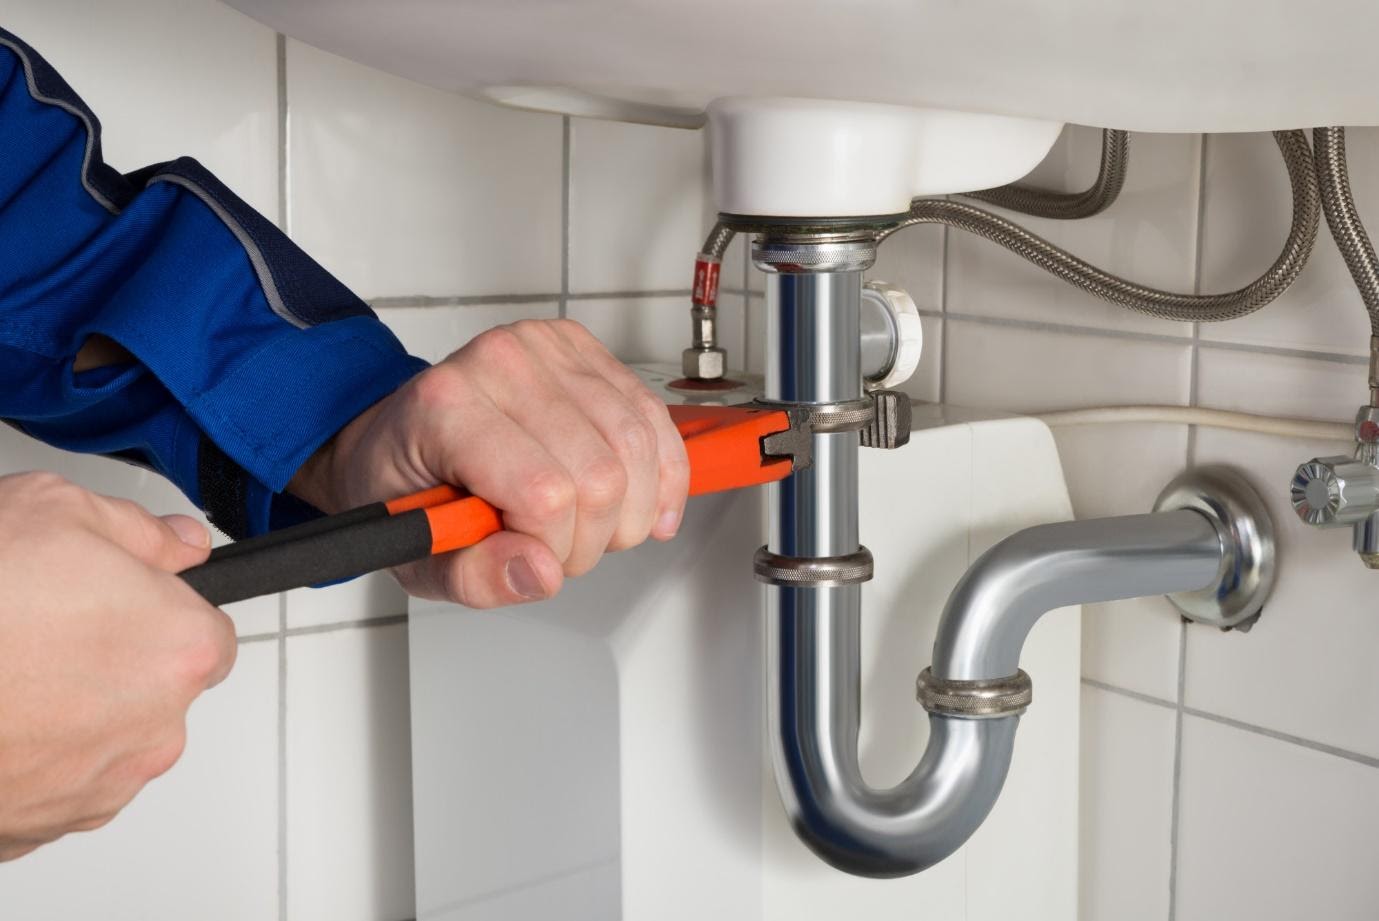 5 Common Plumbing Issues You Might Experience in an Older House